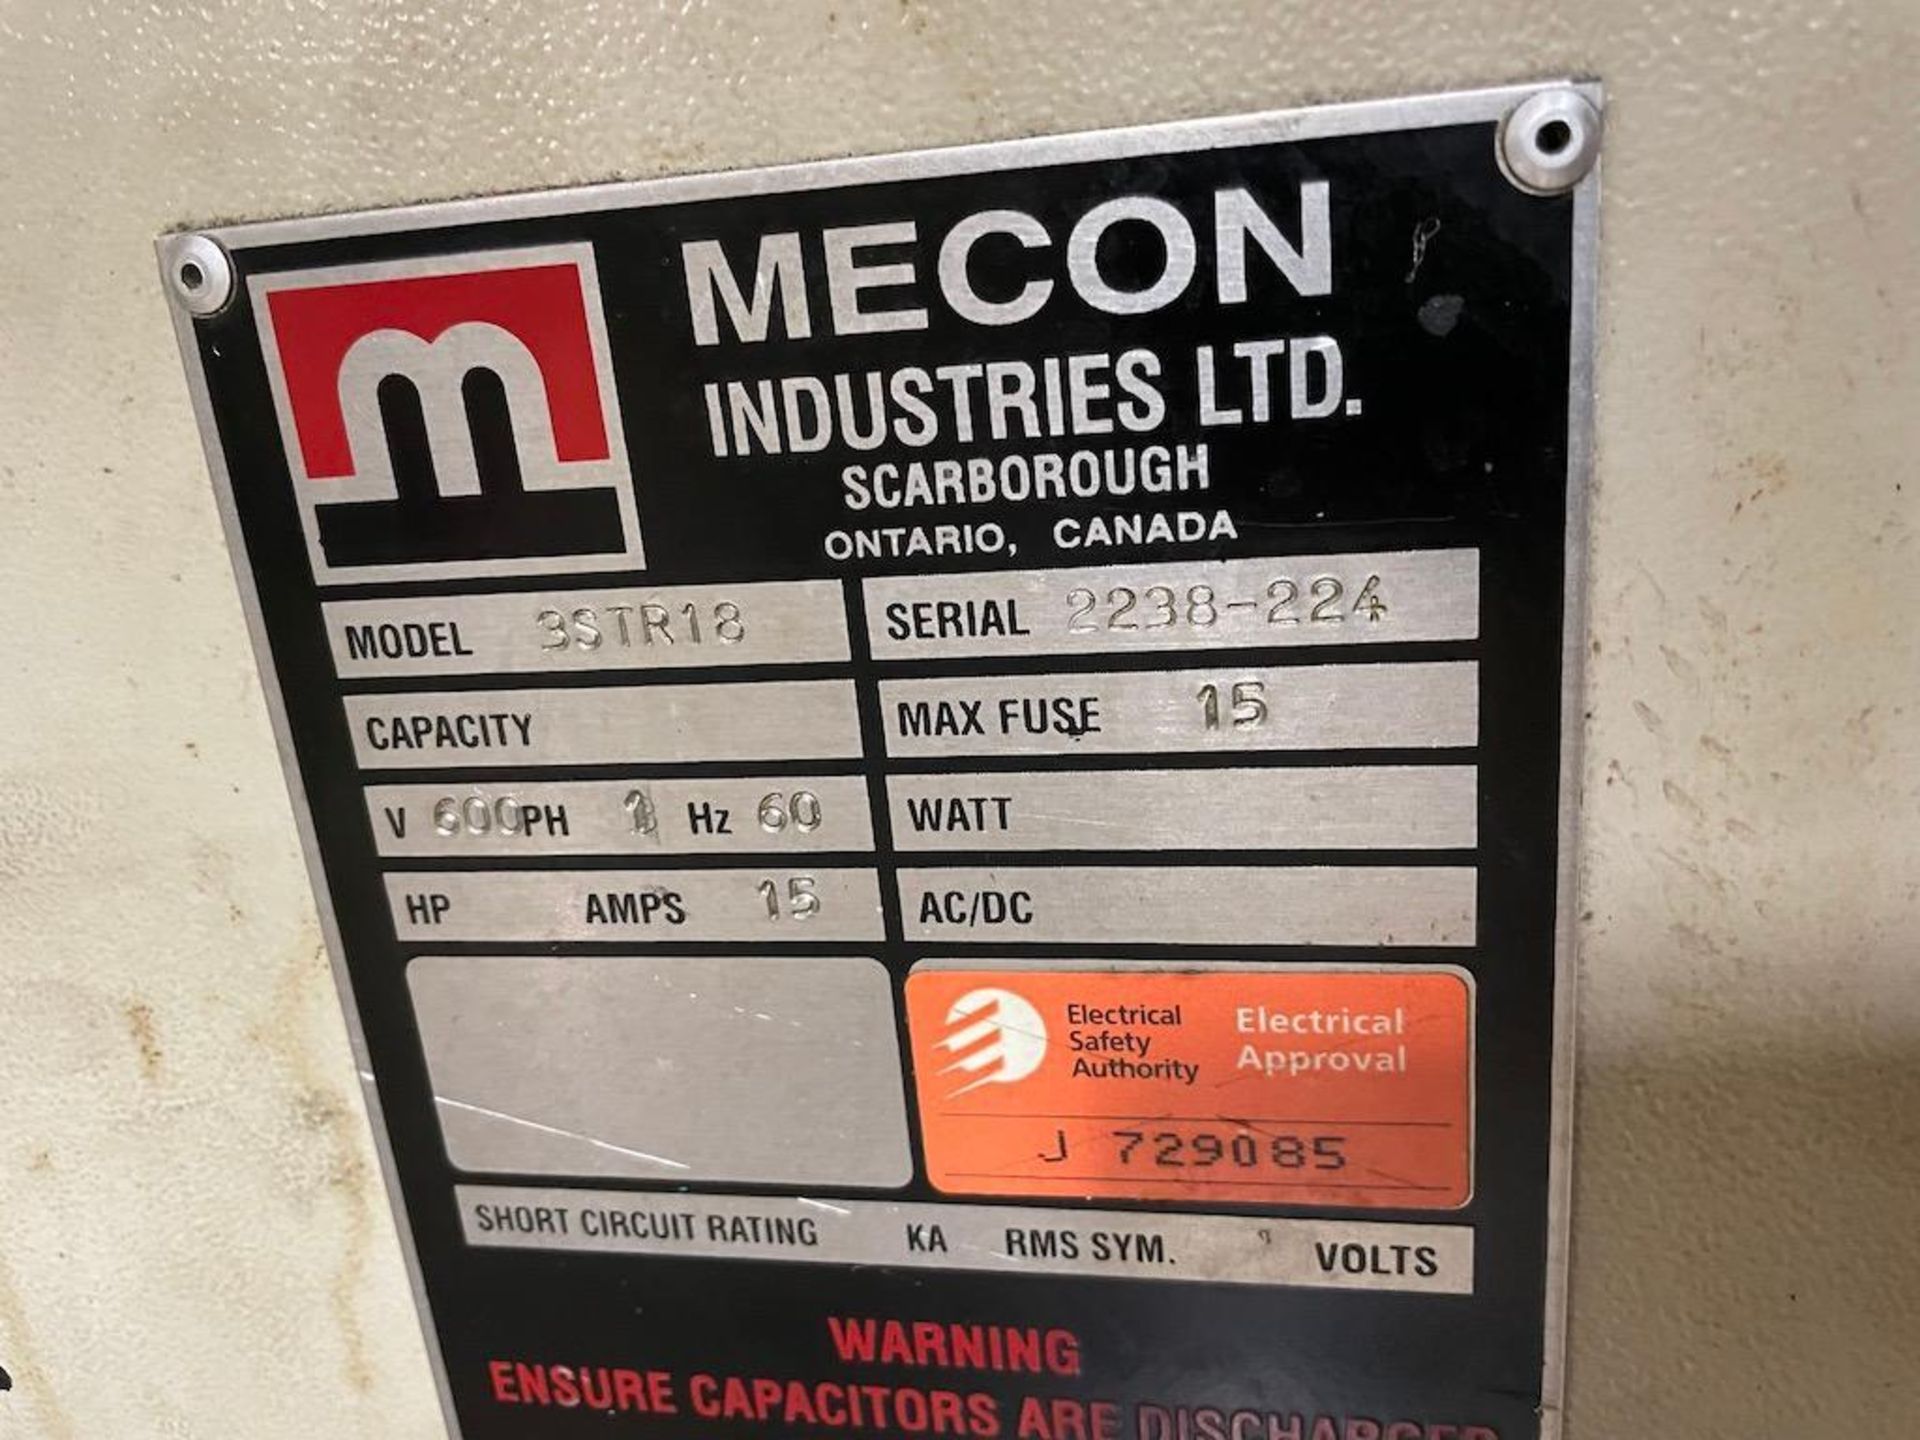 MECON STRAIGHTENER MODEL 3STR18, SN 2238-224 [EXCLUSIVE RIGGING FEE OF $ 750 WILL BE ADDED TO THE IN - Image 2 of 4